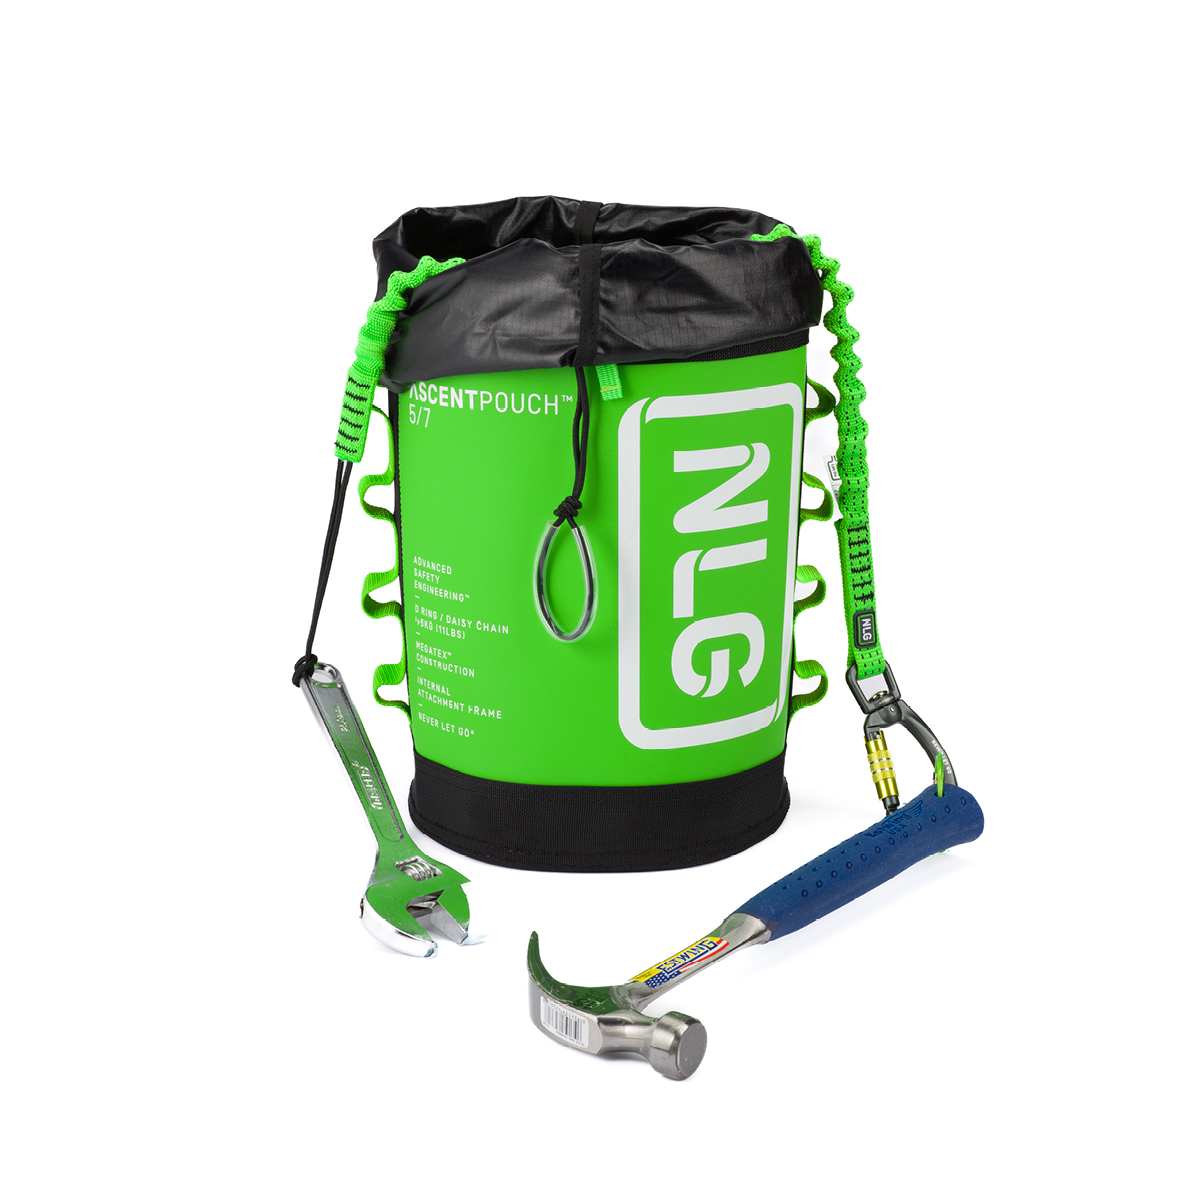 NLG Ascent Pouch from Columbia Safety